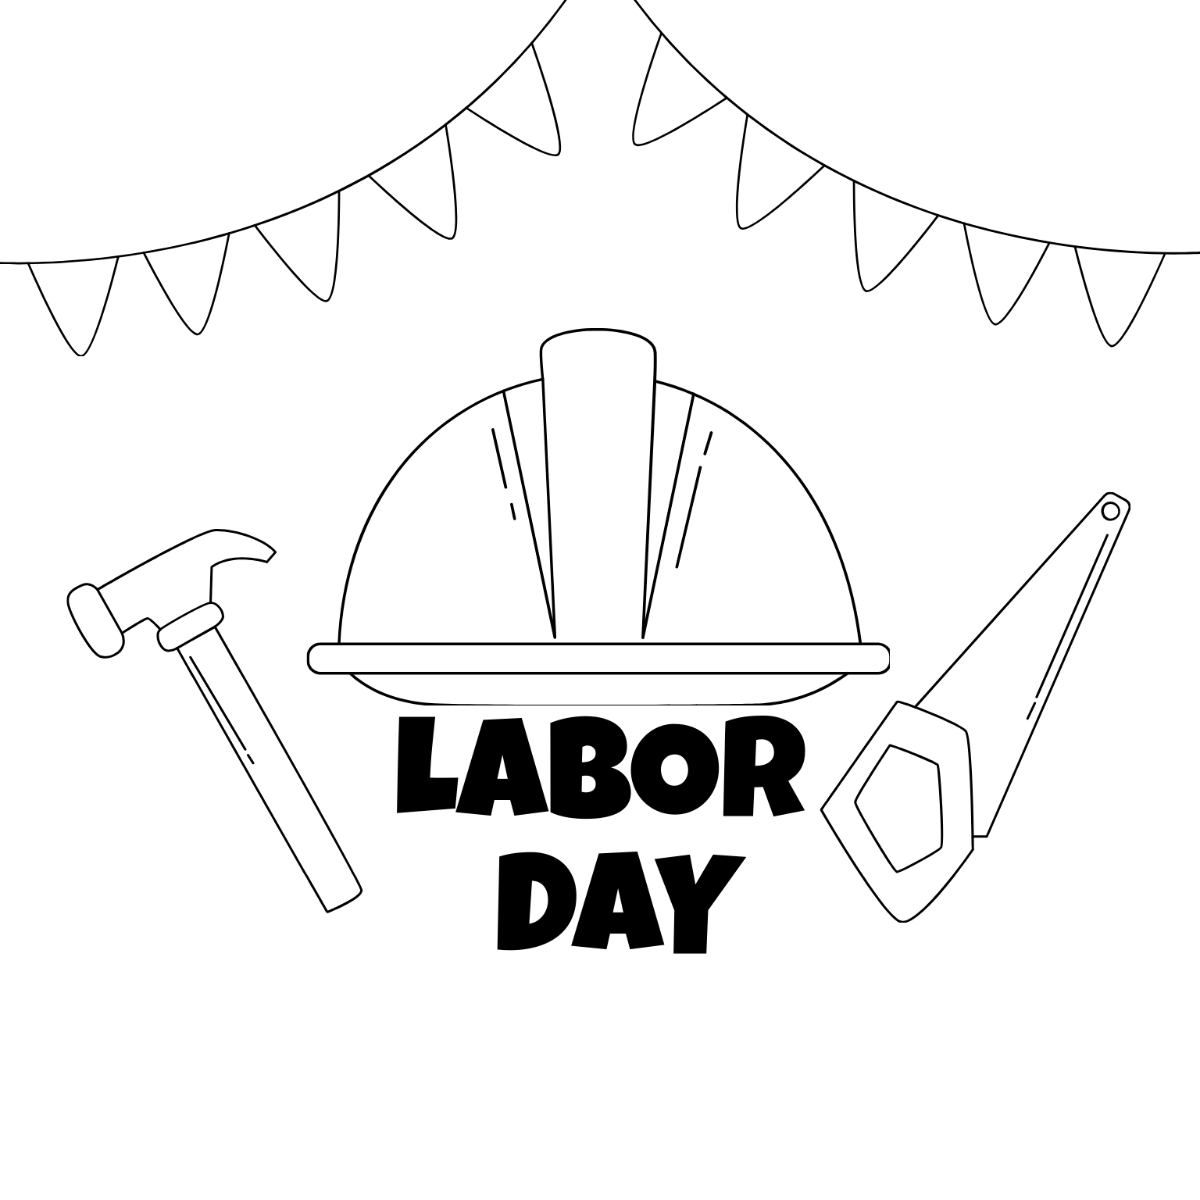 Labor Day Illustration Drawing Template